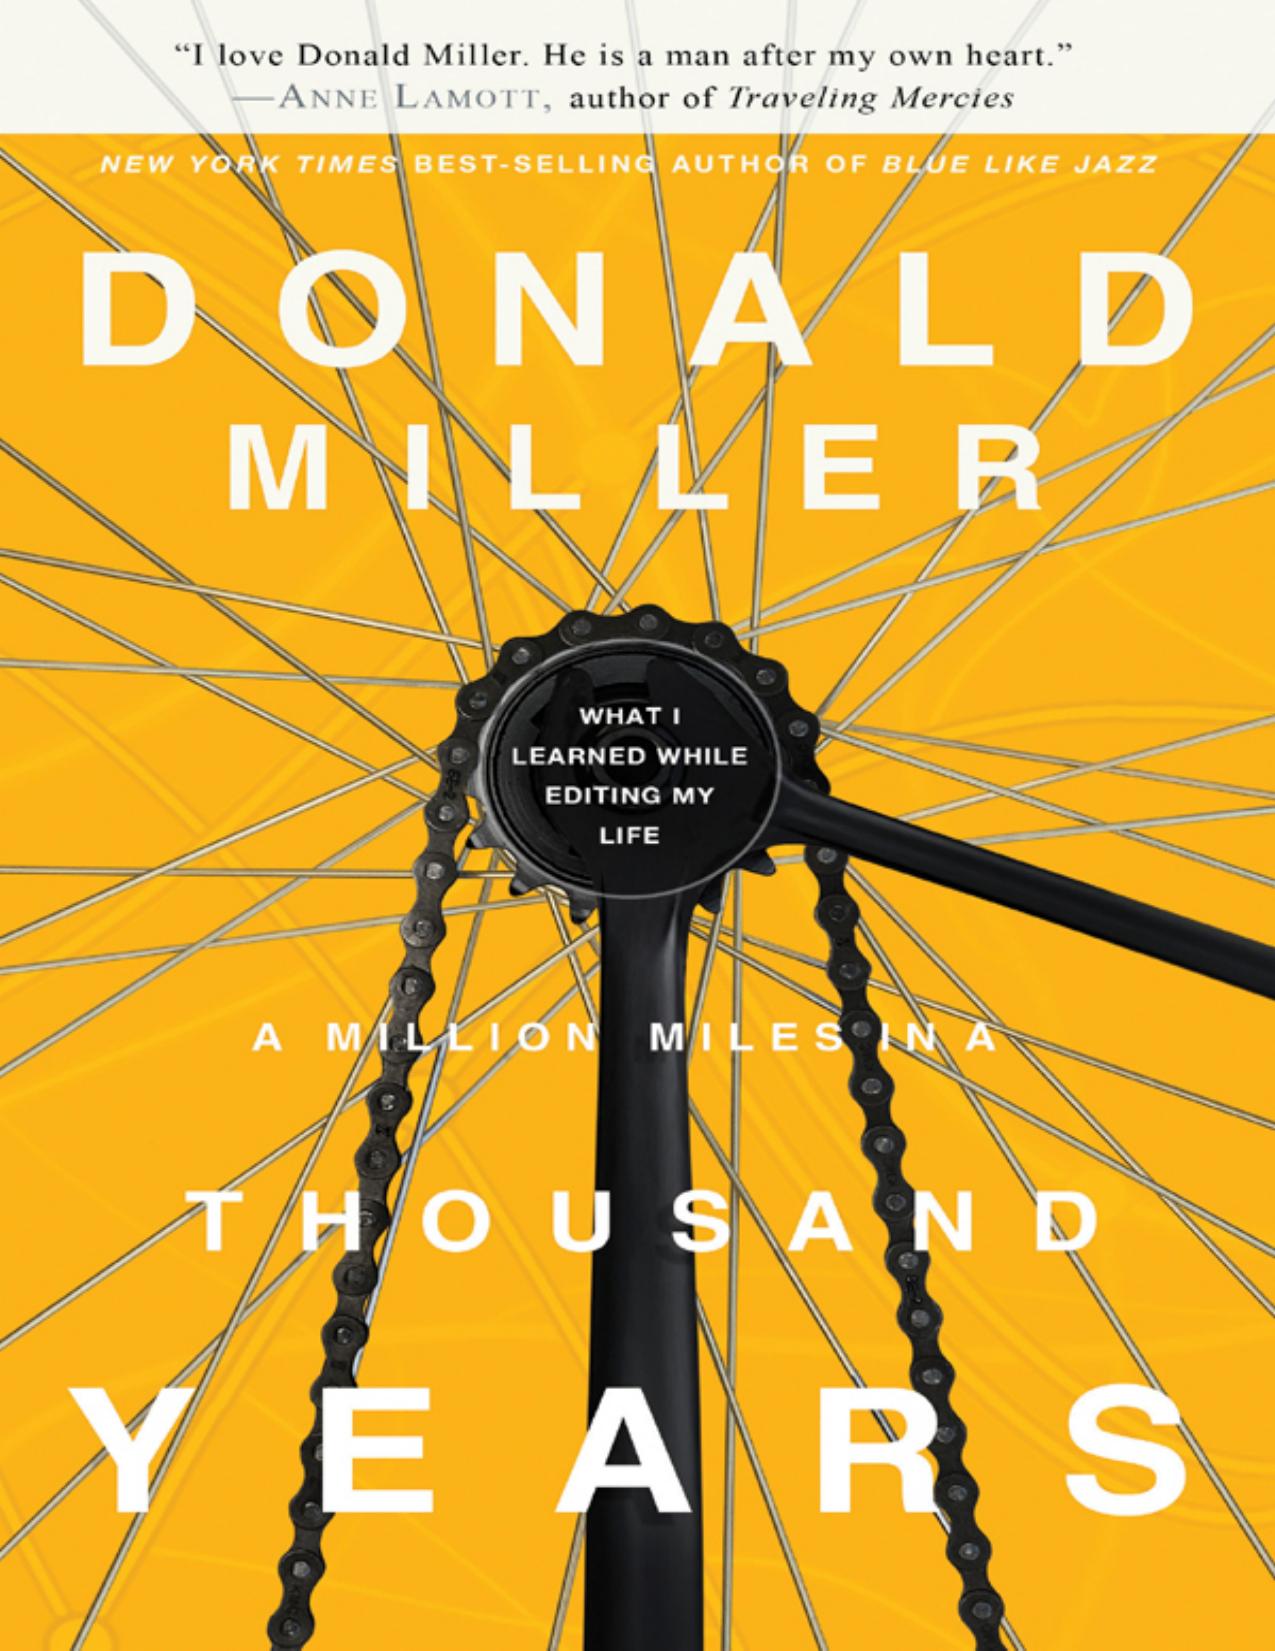 A Million Miles in a Thousand Years : What I Learned While Editing My Life by Donald Miller